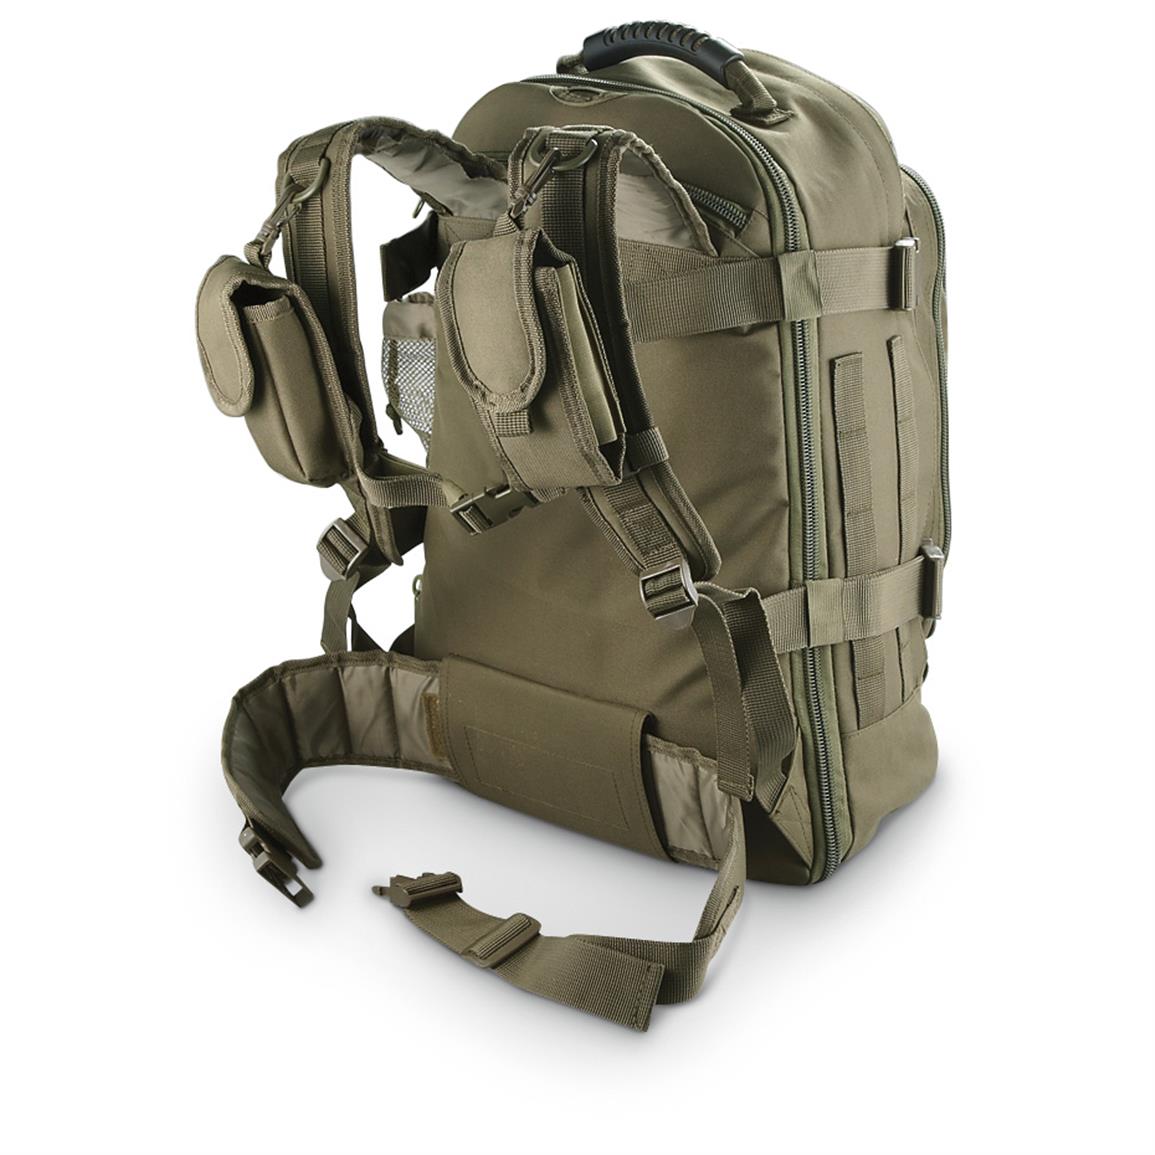 Cactus Jack Expandable Tactical Backpack - 614671, Military Style ...